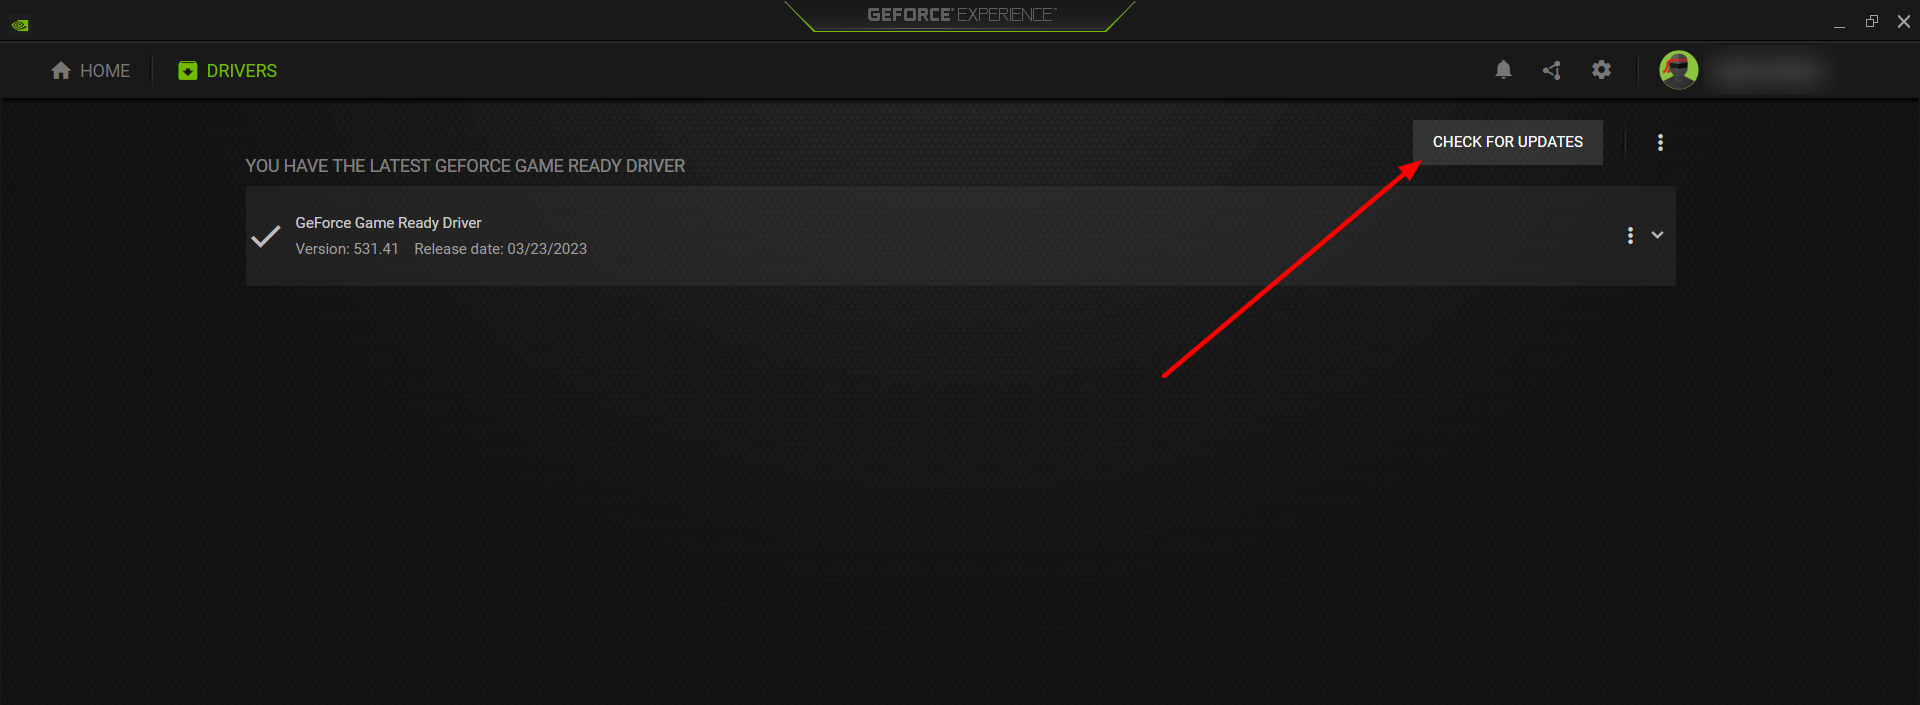 Check-for-Driver-Update-On-Geforce-Experience